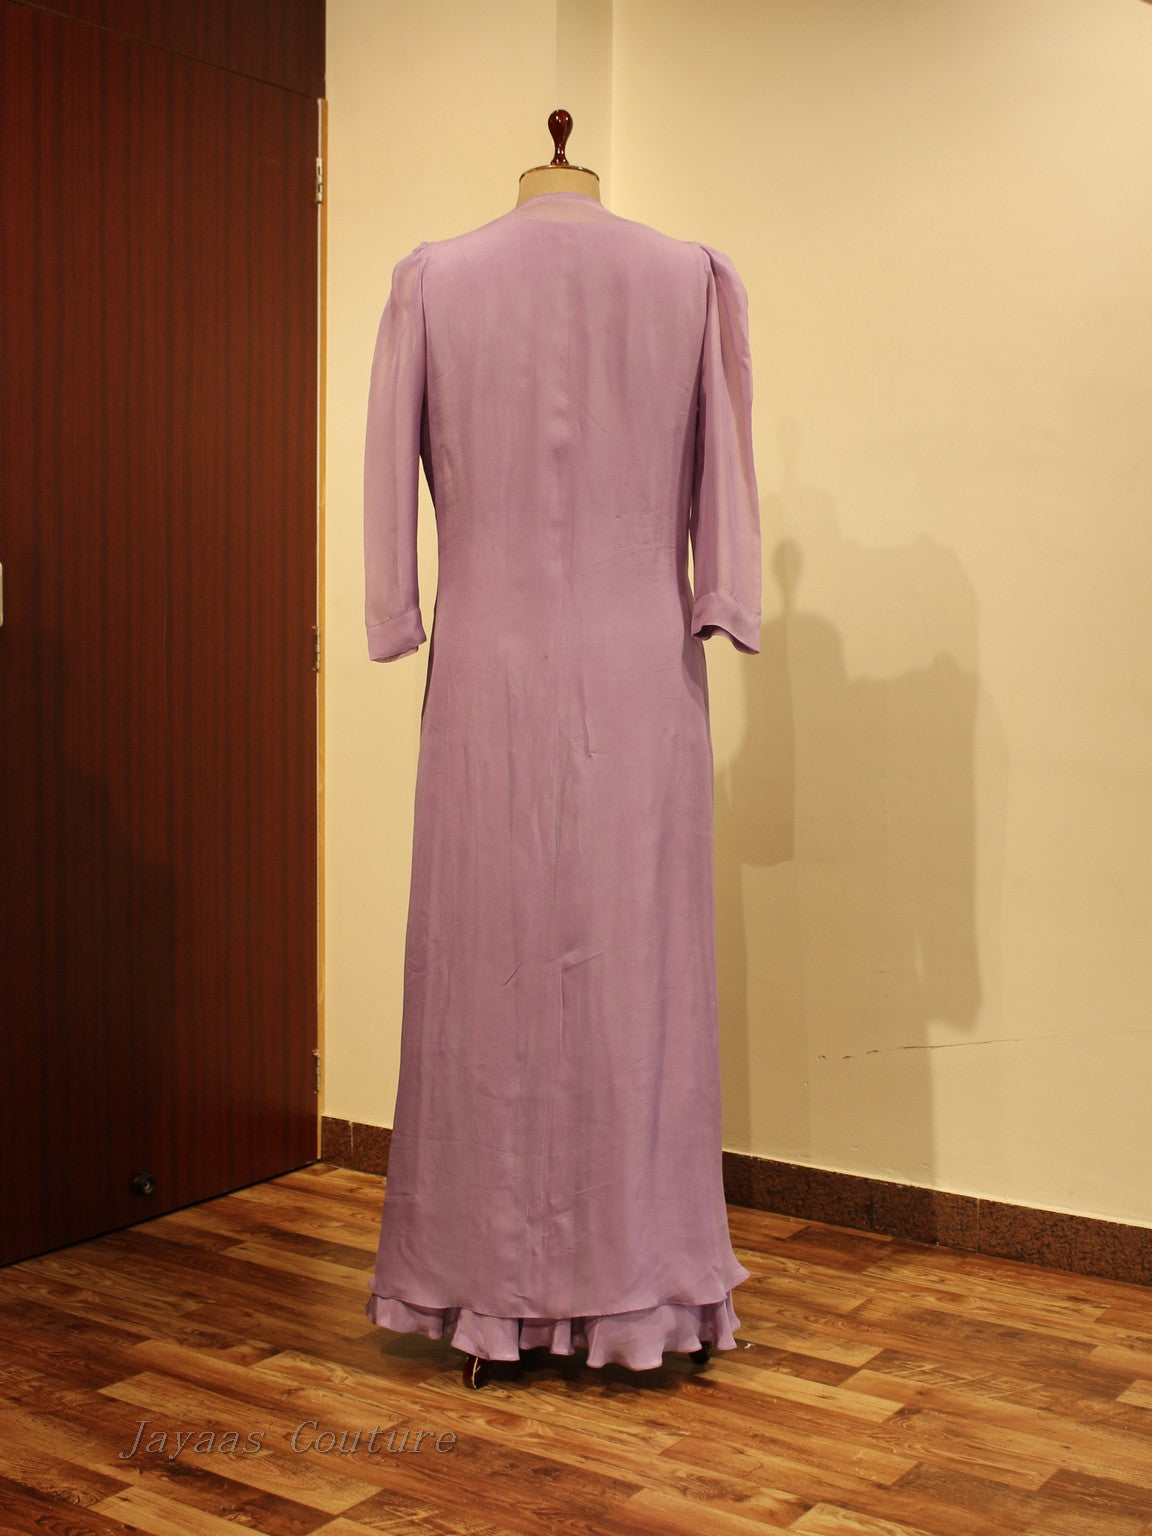 Lavanader gown with shrug